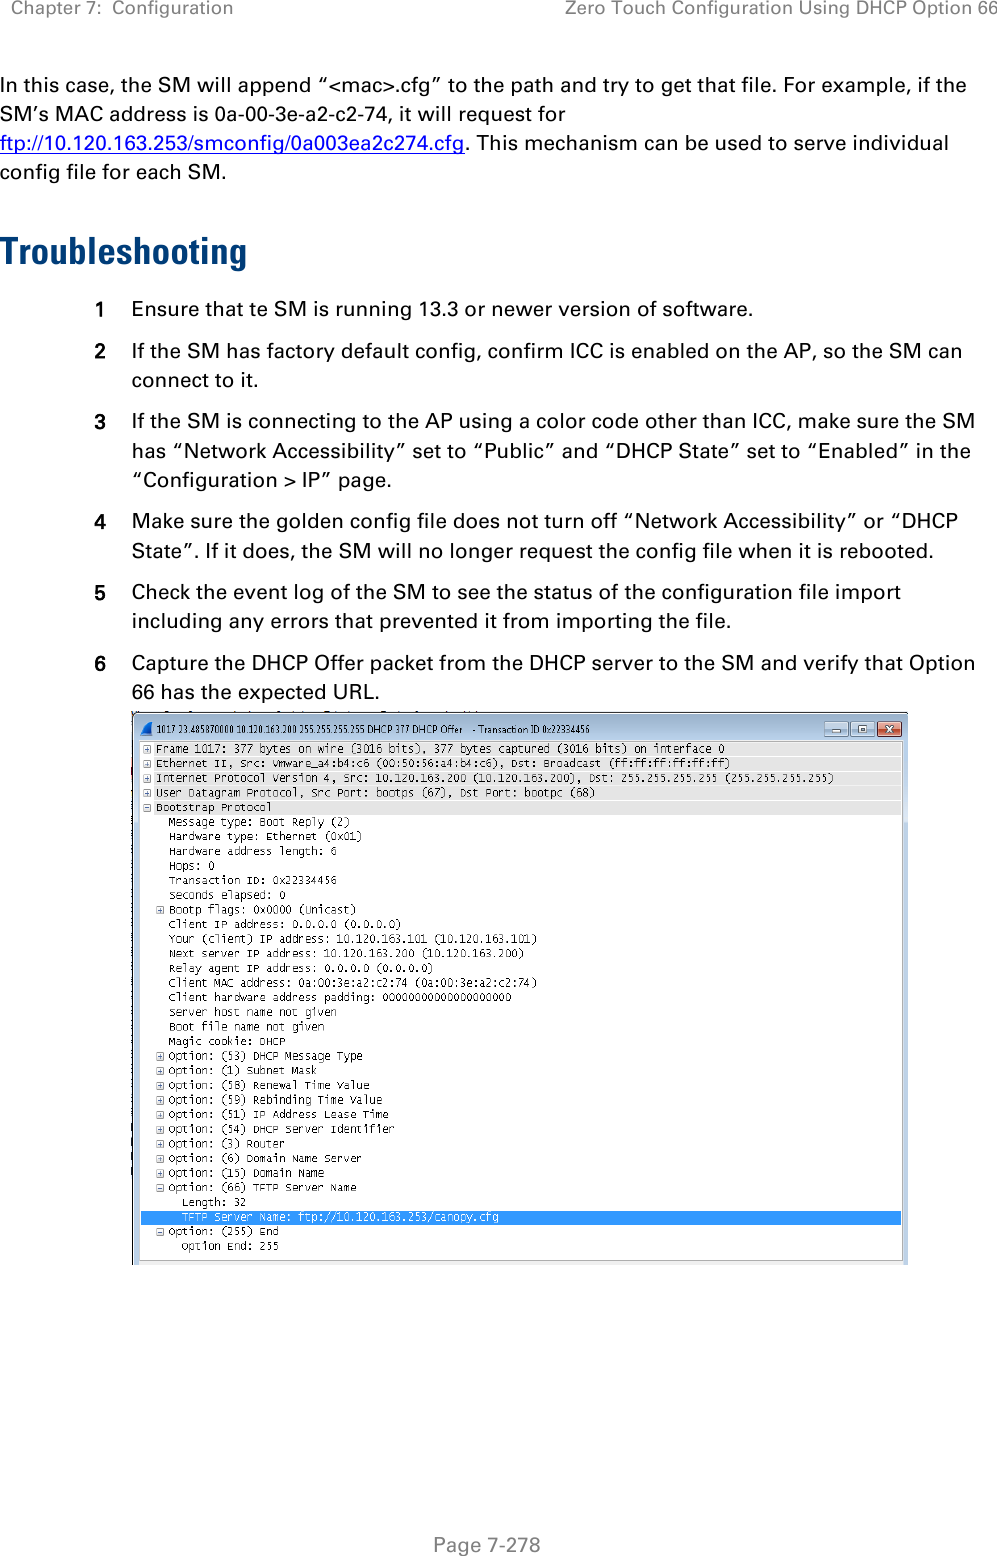 Chapter 7:  Configuration Zero Touch Configuration Using DHCP Option 66   Page 7-278 In this case, the SM will append “&lt;mac&gt;.cfg” to the path and try to get that file. For example, if the SM’s MAC address is 0a-00-3e-a2-c2-74, it will request for ftp://10.120.163.253/smconfig/0a003ea2c274.cfg. This mechanism can be used to serve individual config file for each SM.  Troubleshooting 1 Ensure that te SM is running 13.3 or newer version of software. 2 If the SM has factory default config, confirm ICC is enabled on the AP, so the SM can connect to it.  3 If the SM is connecting to the AP using a color code other than ICC, make sure the SM has “Network Accessibility” set to “Public” and “DHCP State” set to “Enabled” in the “Configuration &gt; IP” page. 4 Make sure the golden config file does not turn off “Network Accessibility” or “DHCP State”. If it does, the SM will no longer request the config file when it is rebooted. 5 Check the event log of the SM to see the status of the configuration file import including any errors that prevented it from importing the file. 6 Capture the DHCP Offer packet from the DHCP server to the SM and verify that Option 66 has the expected URL.   